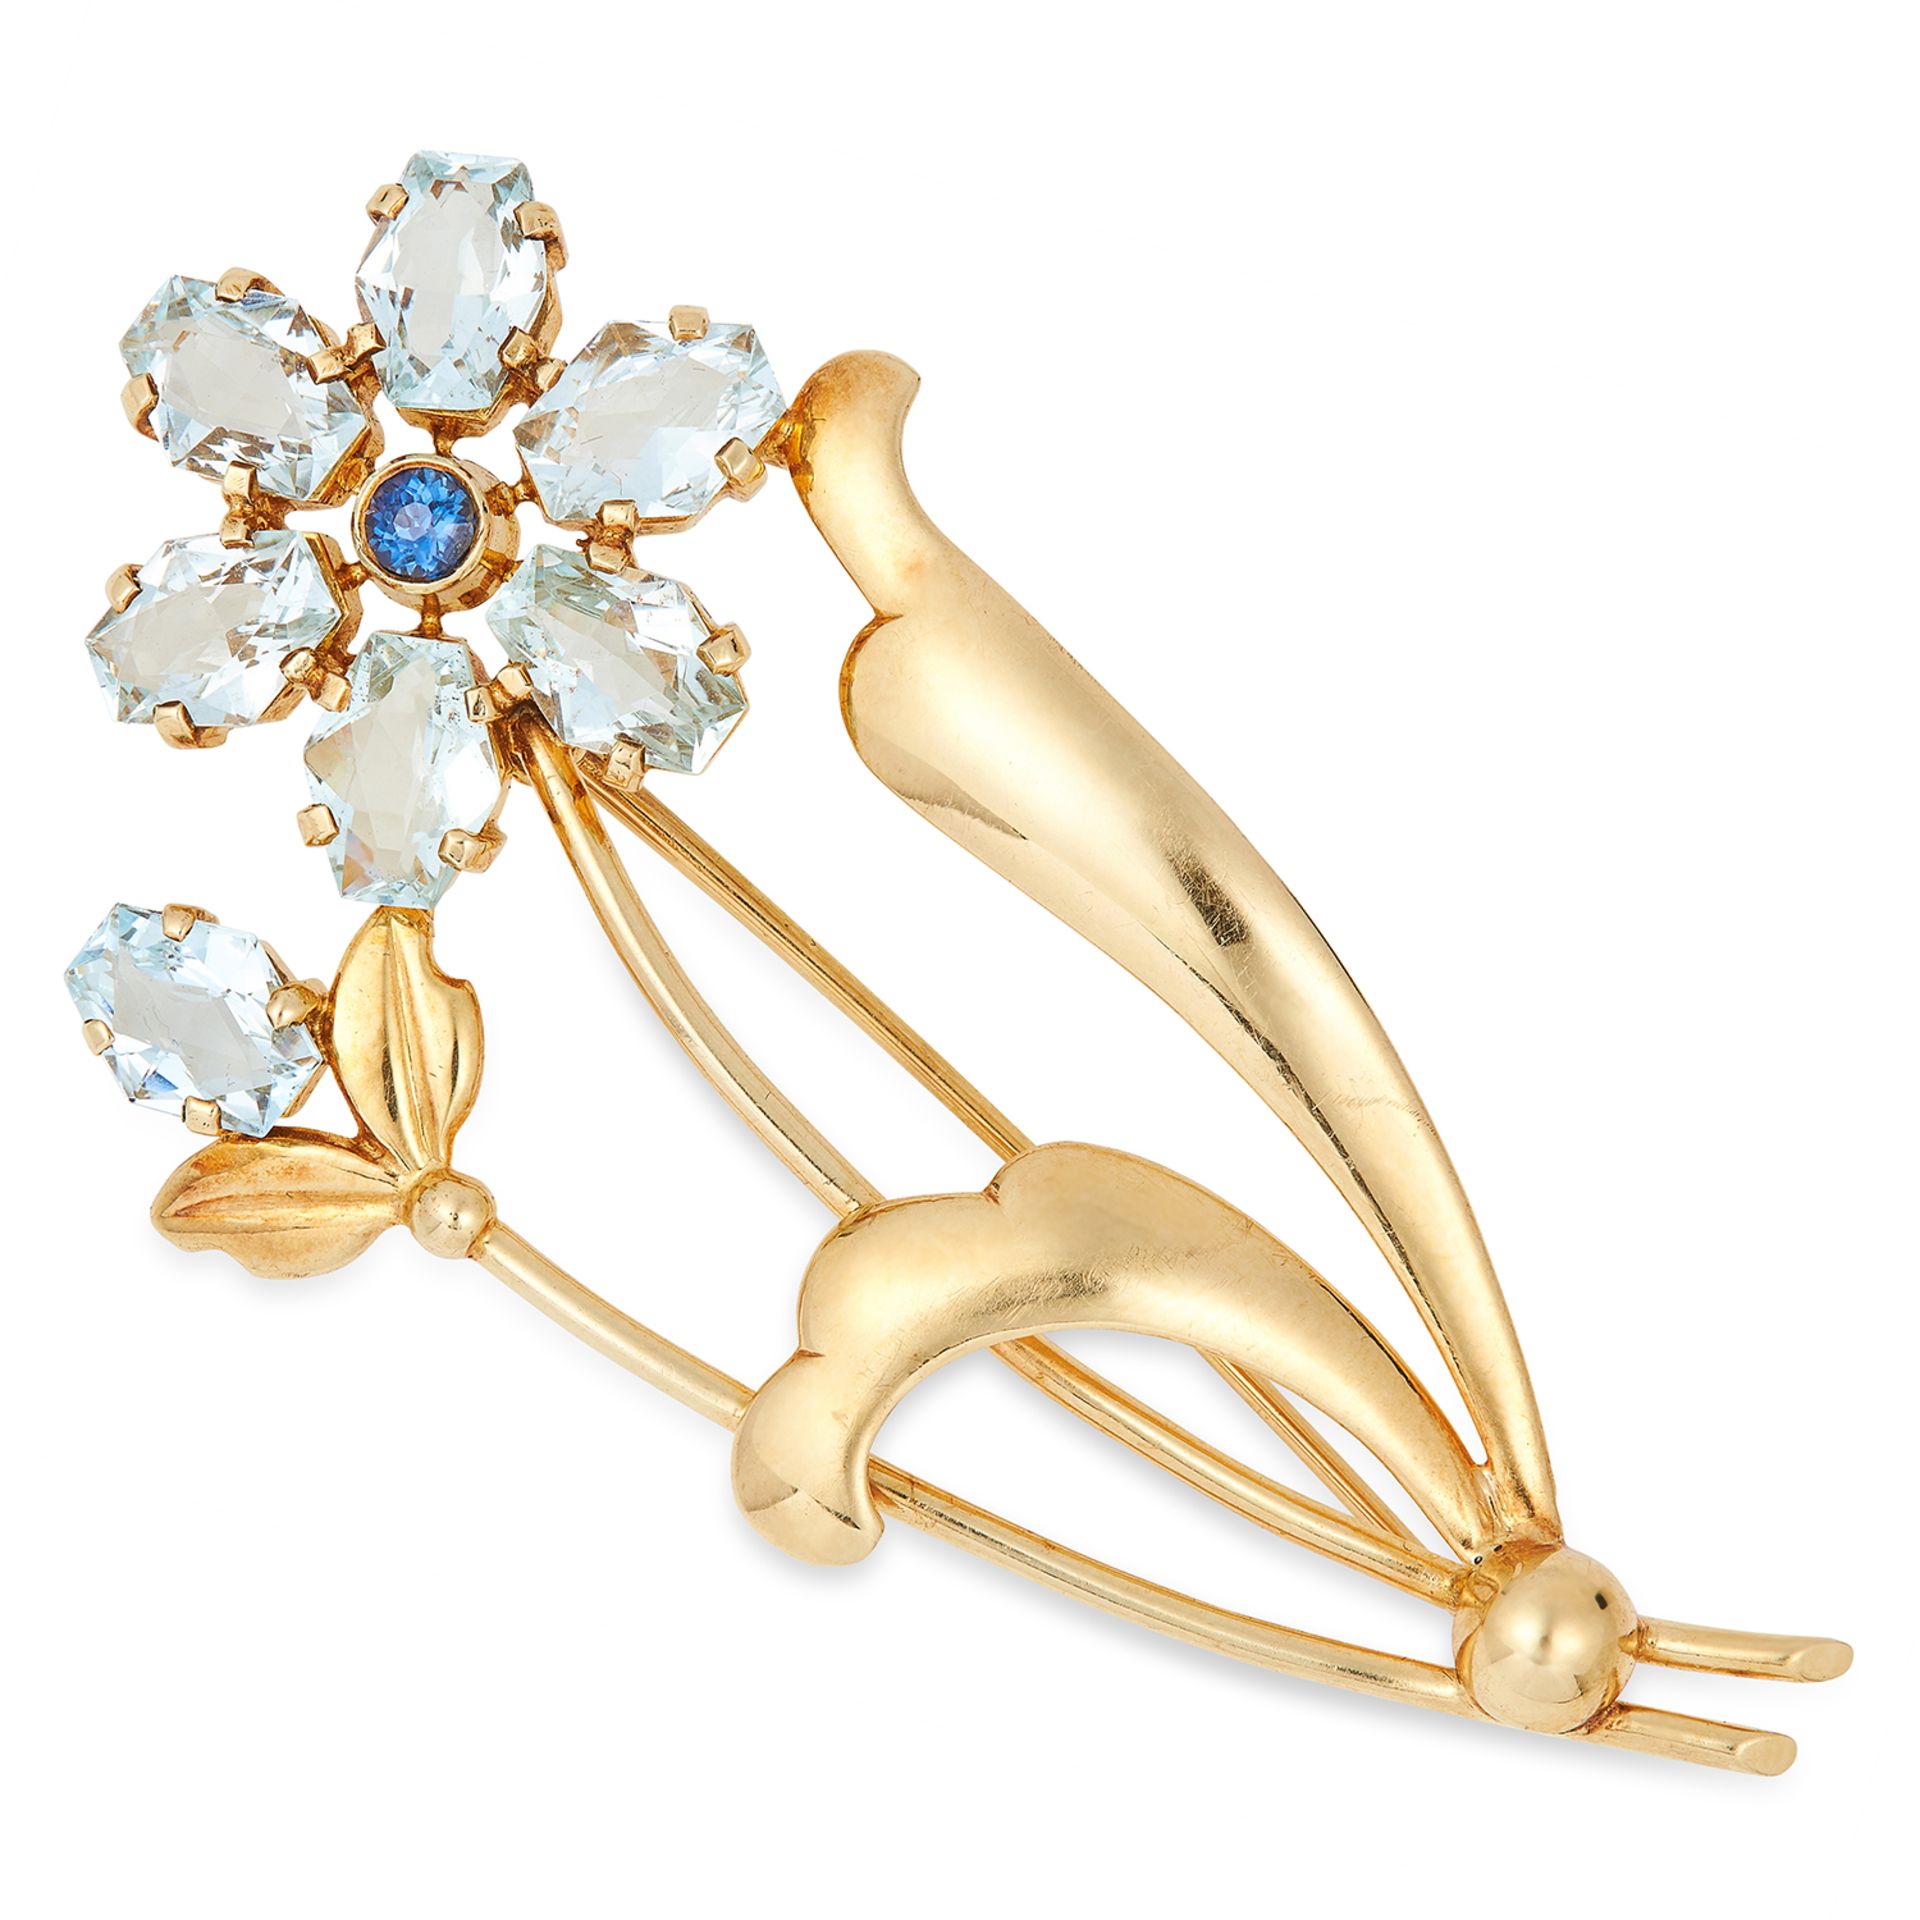 VINTAGE AQUAMARINE AND SAPPHIRE FLOWER BROOCH set with fancy 11cut aquamarines and a round cut